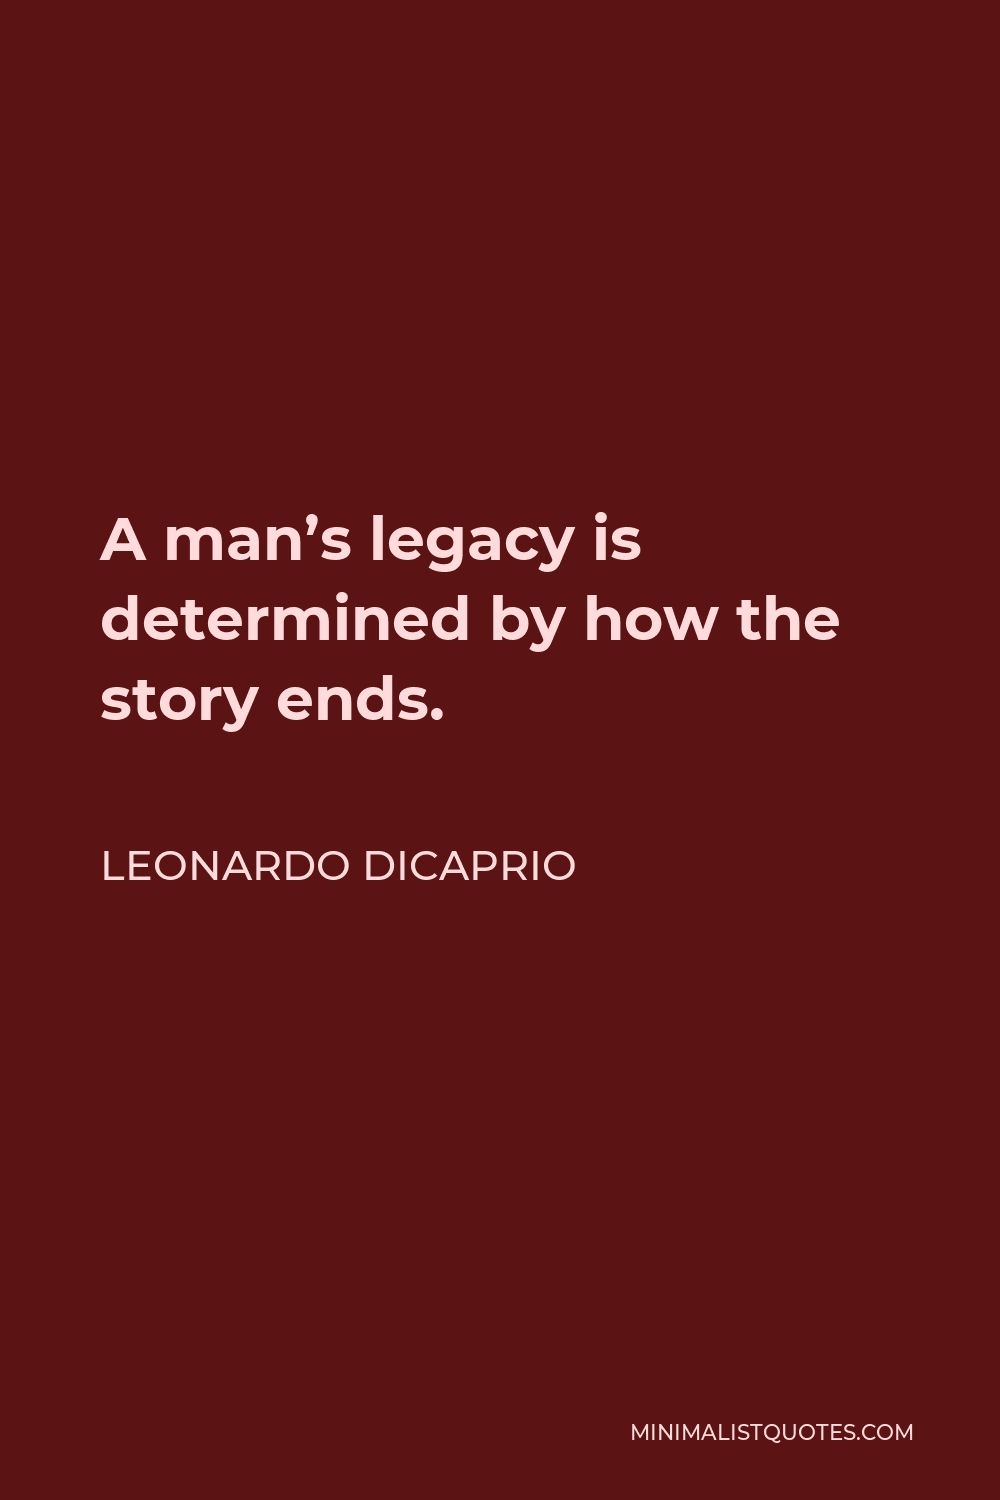 Leonardo DiCaprio Quote - A man’s legacy is determined by how the story ends.